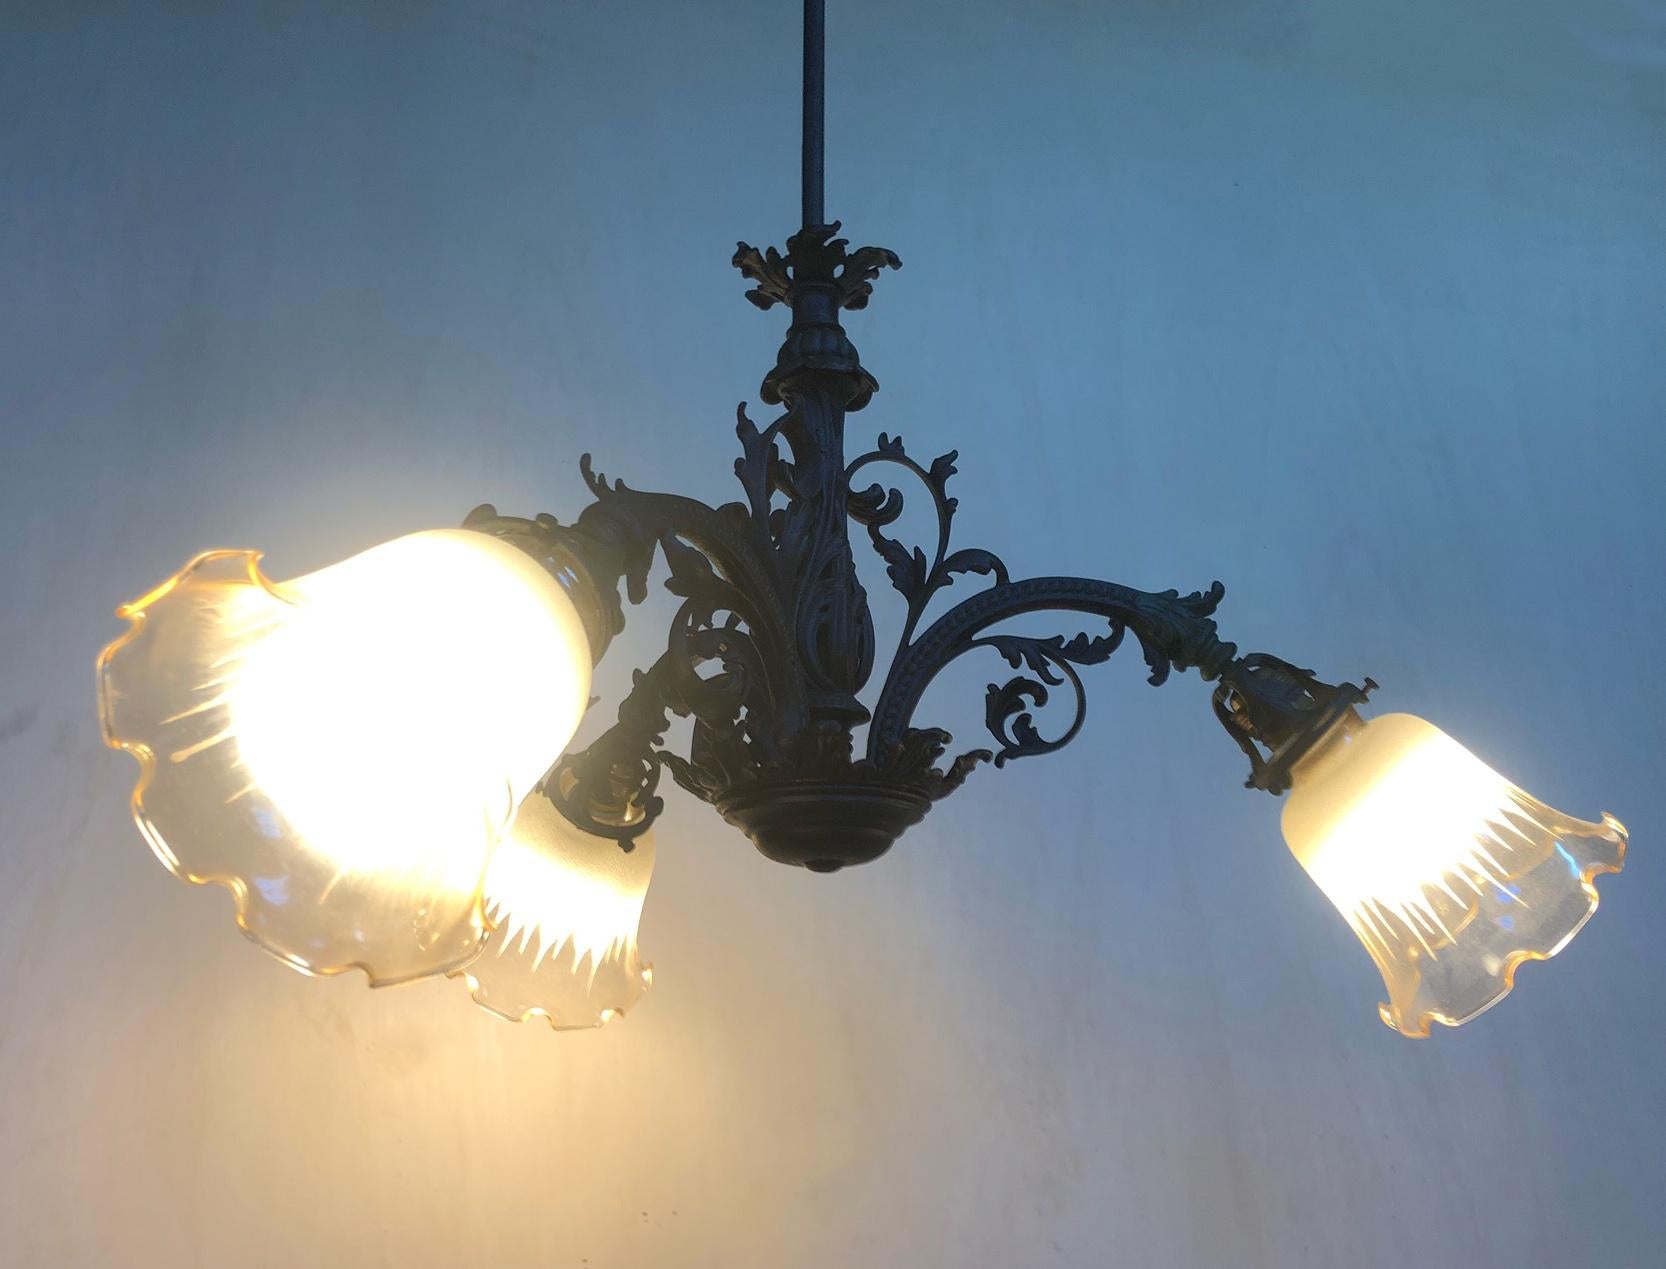 Italian iron chandelier with 3 lights very strong.
Original from 1970. 
Very beautiful special iron patinated.
Comes from an old city villa in the Lucca area of Tuscany.
As shown in the photographs and videos, there are some small imperfect